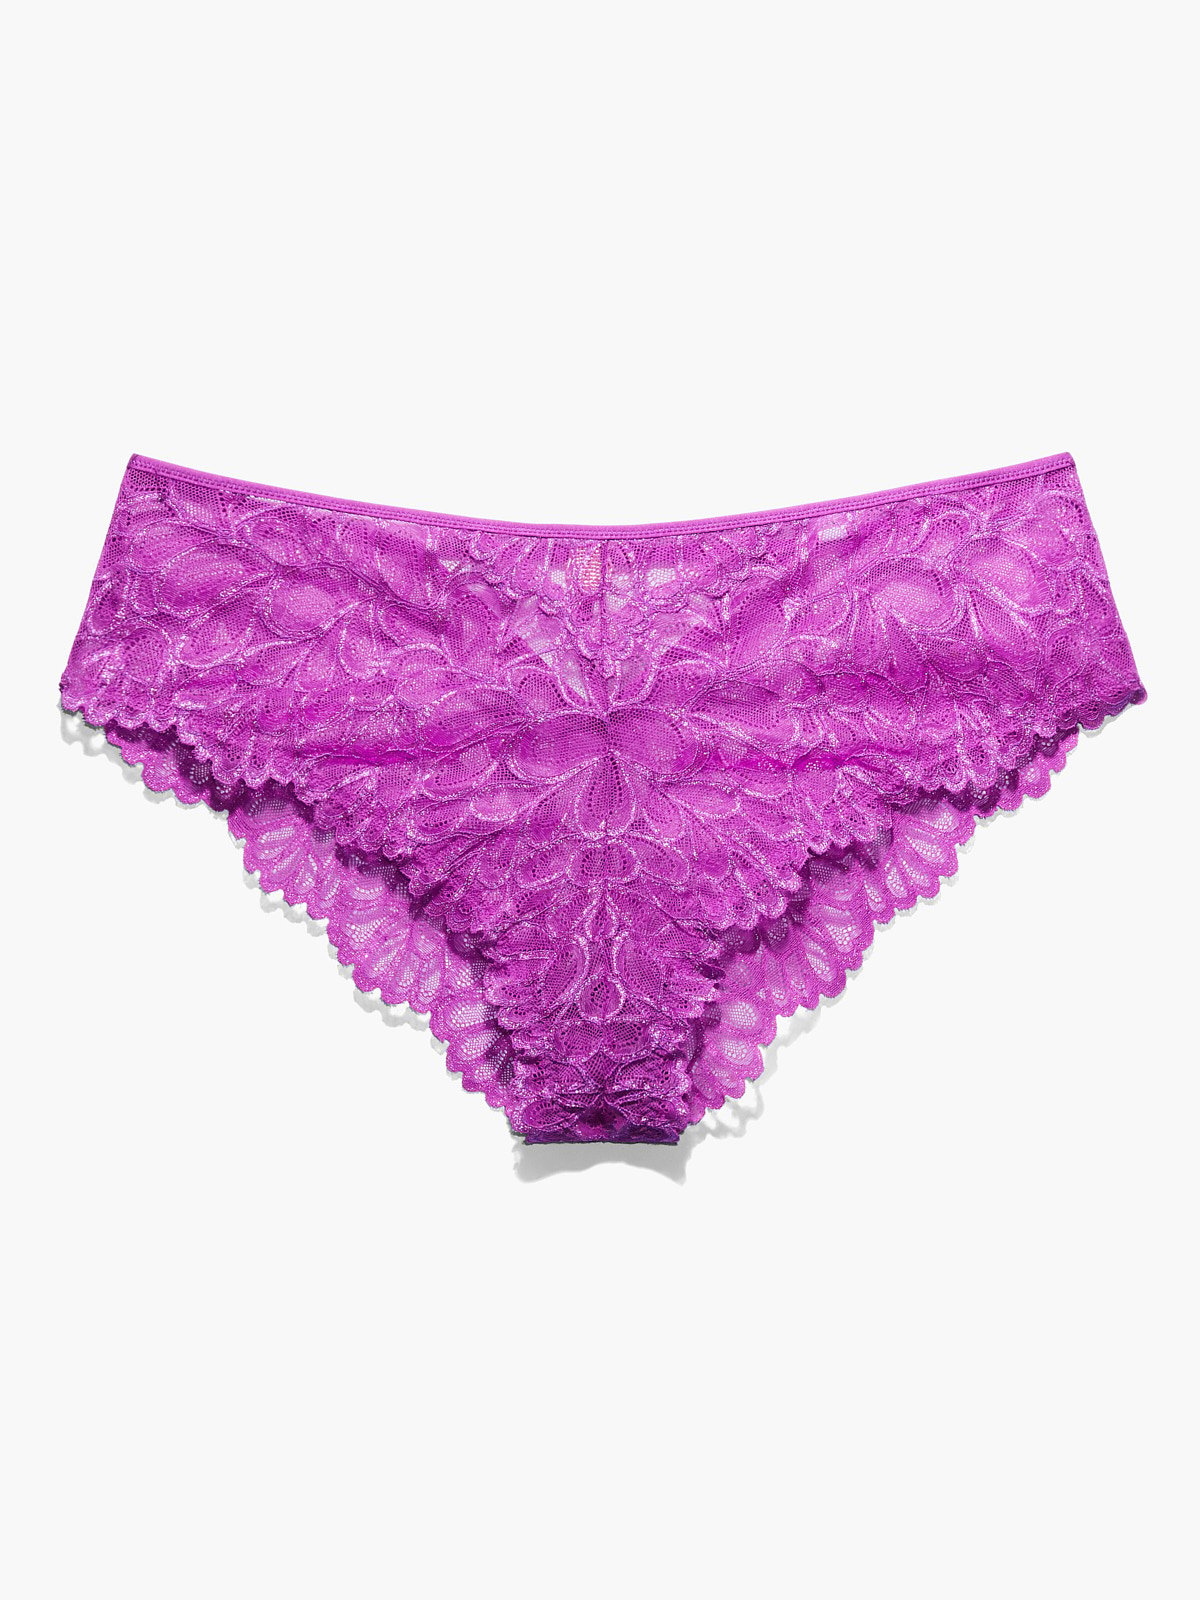 Savage Not Sorry Lace Cheeky Panty in Purple | SAVAGE X FENTY